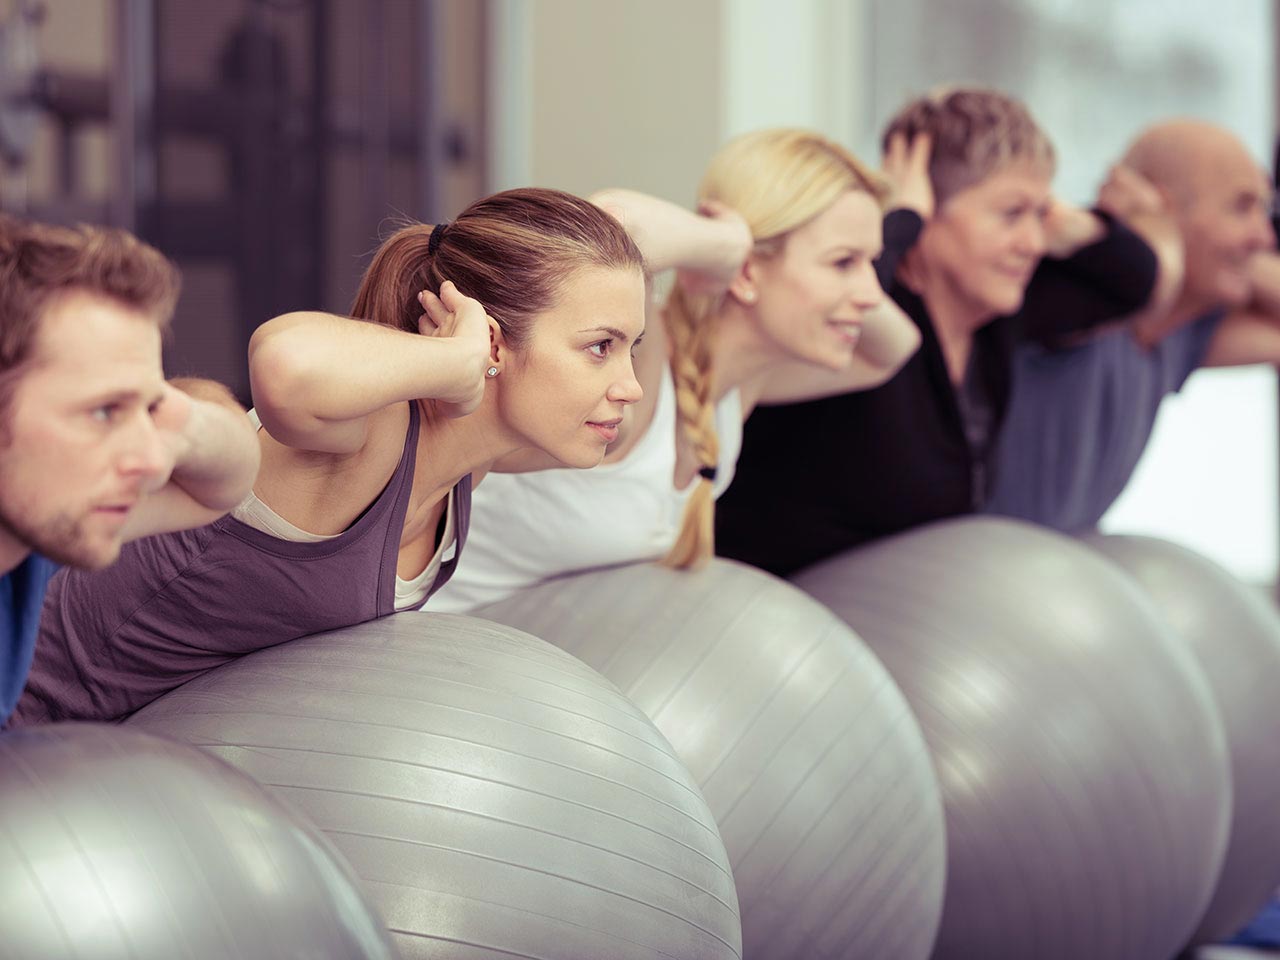 Group of people in gym using pilates balls